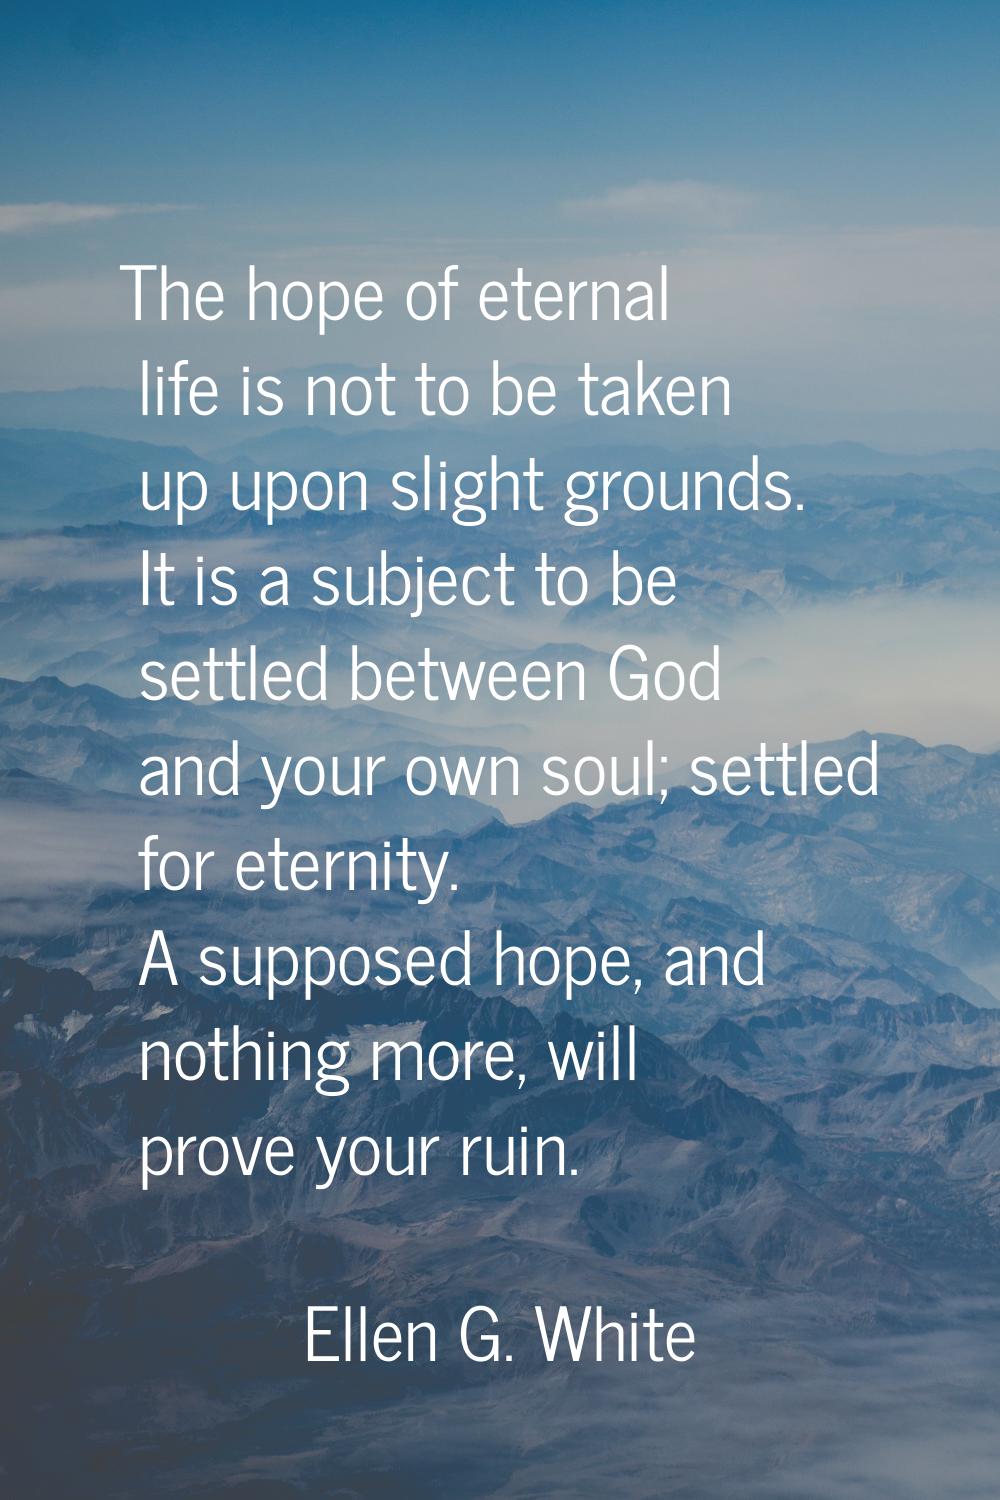 The hope of eternal life is not to be taken up upon slight grounds. It is a subject to be settled b